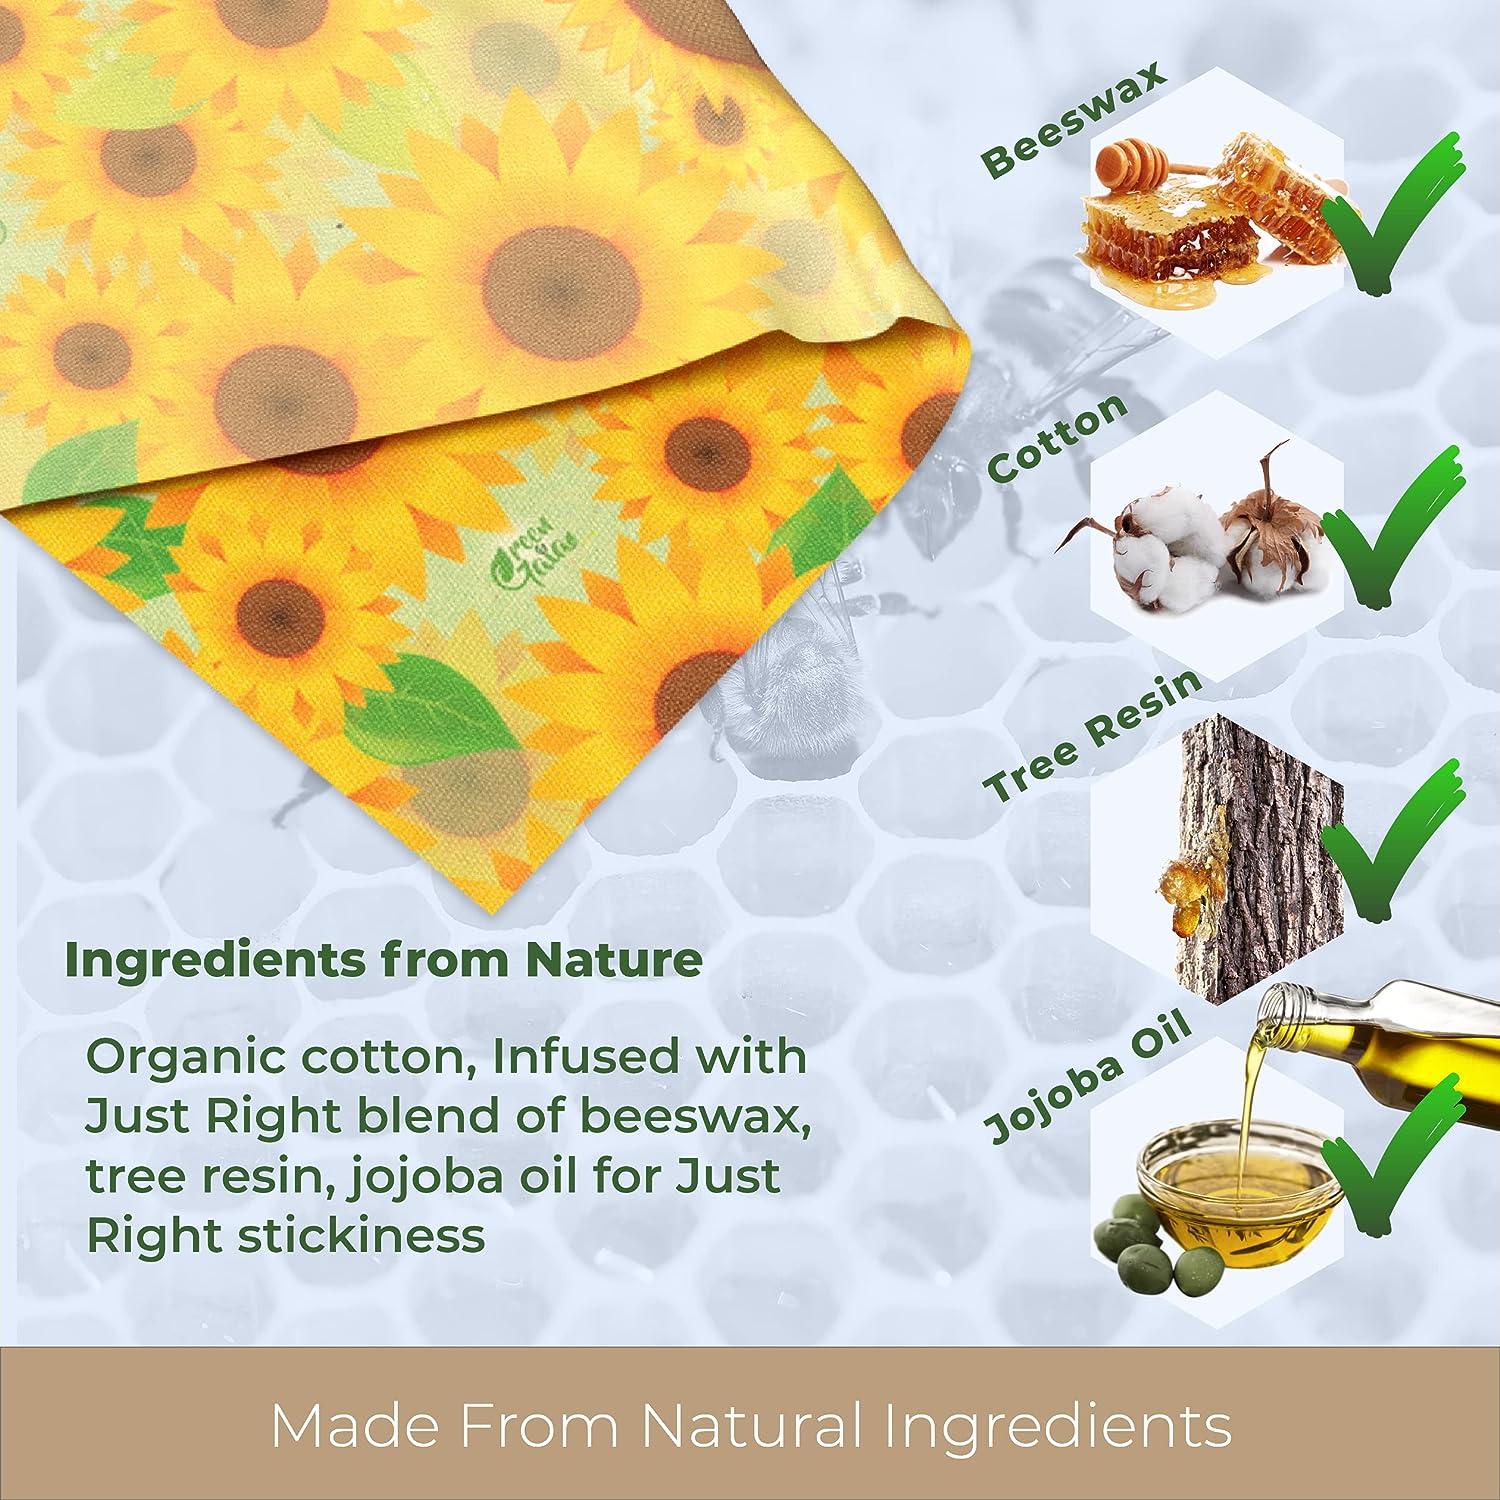 Green4Gaia Reusable Beeswax Food Wrap - Assorted 6 pack with